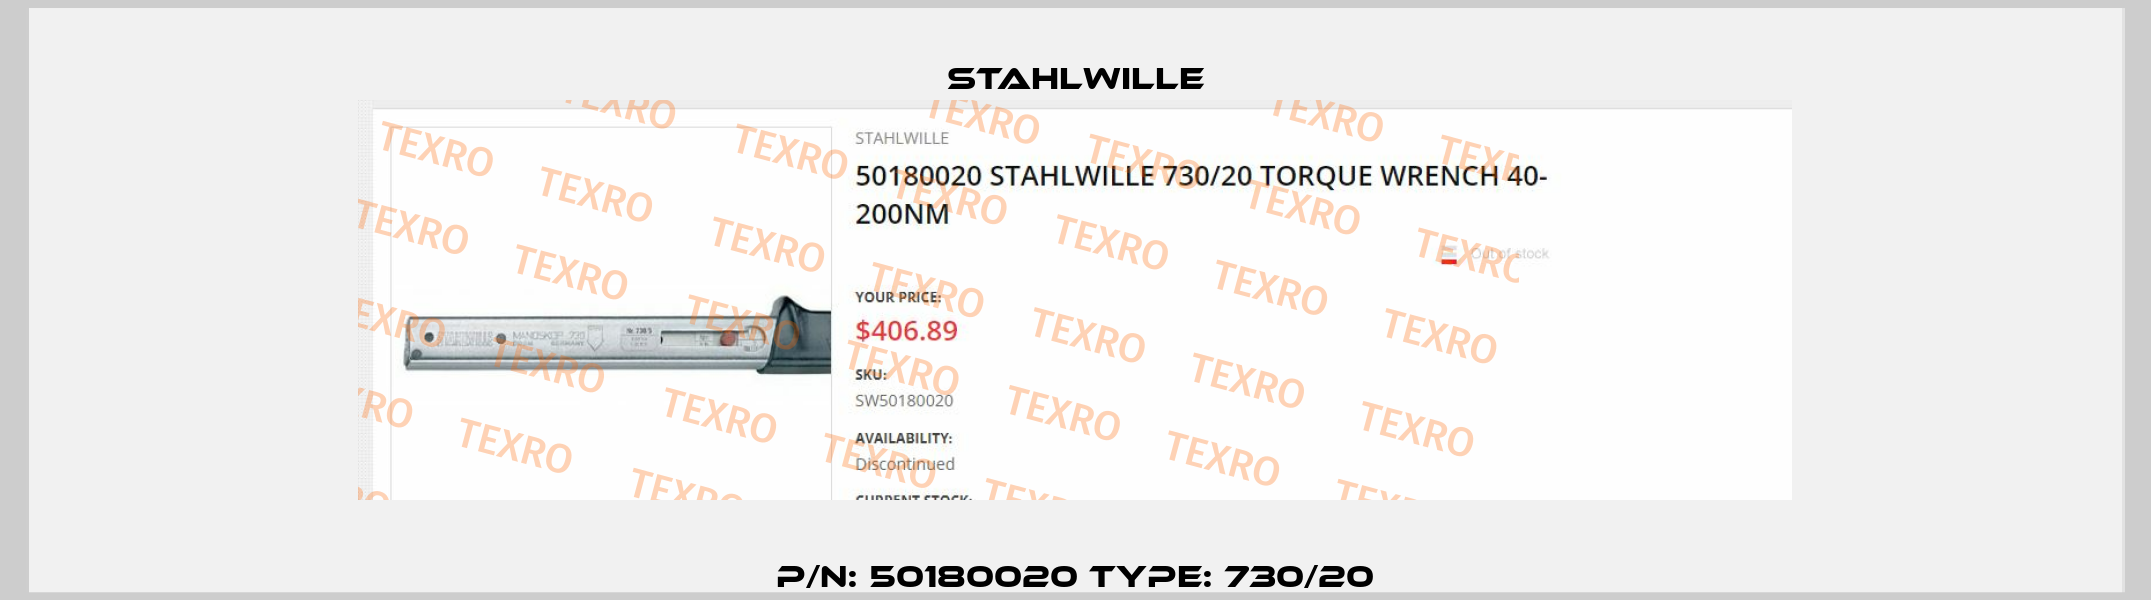 P/N: 50180020 Type: 730/20 Stahlwille